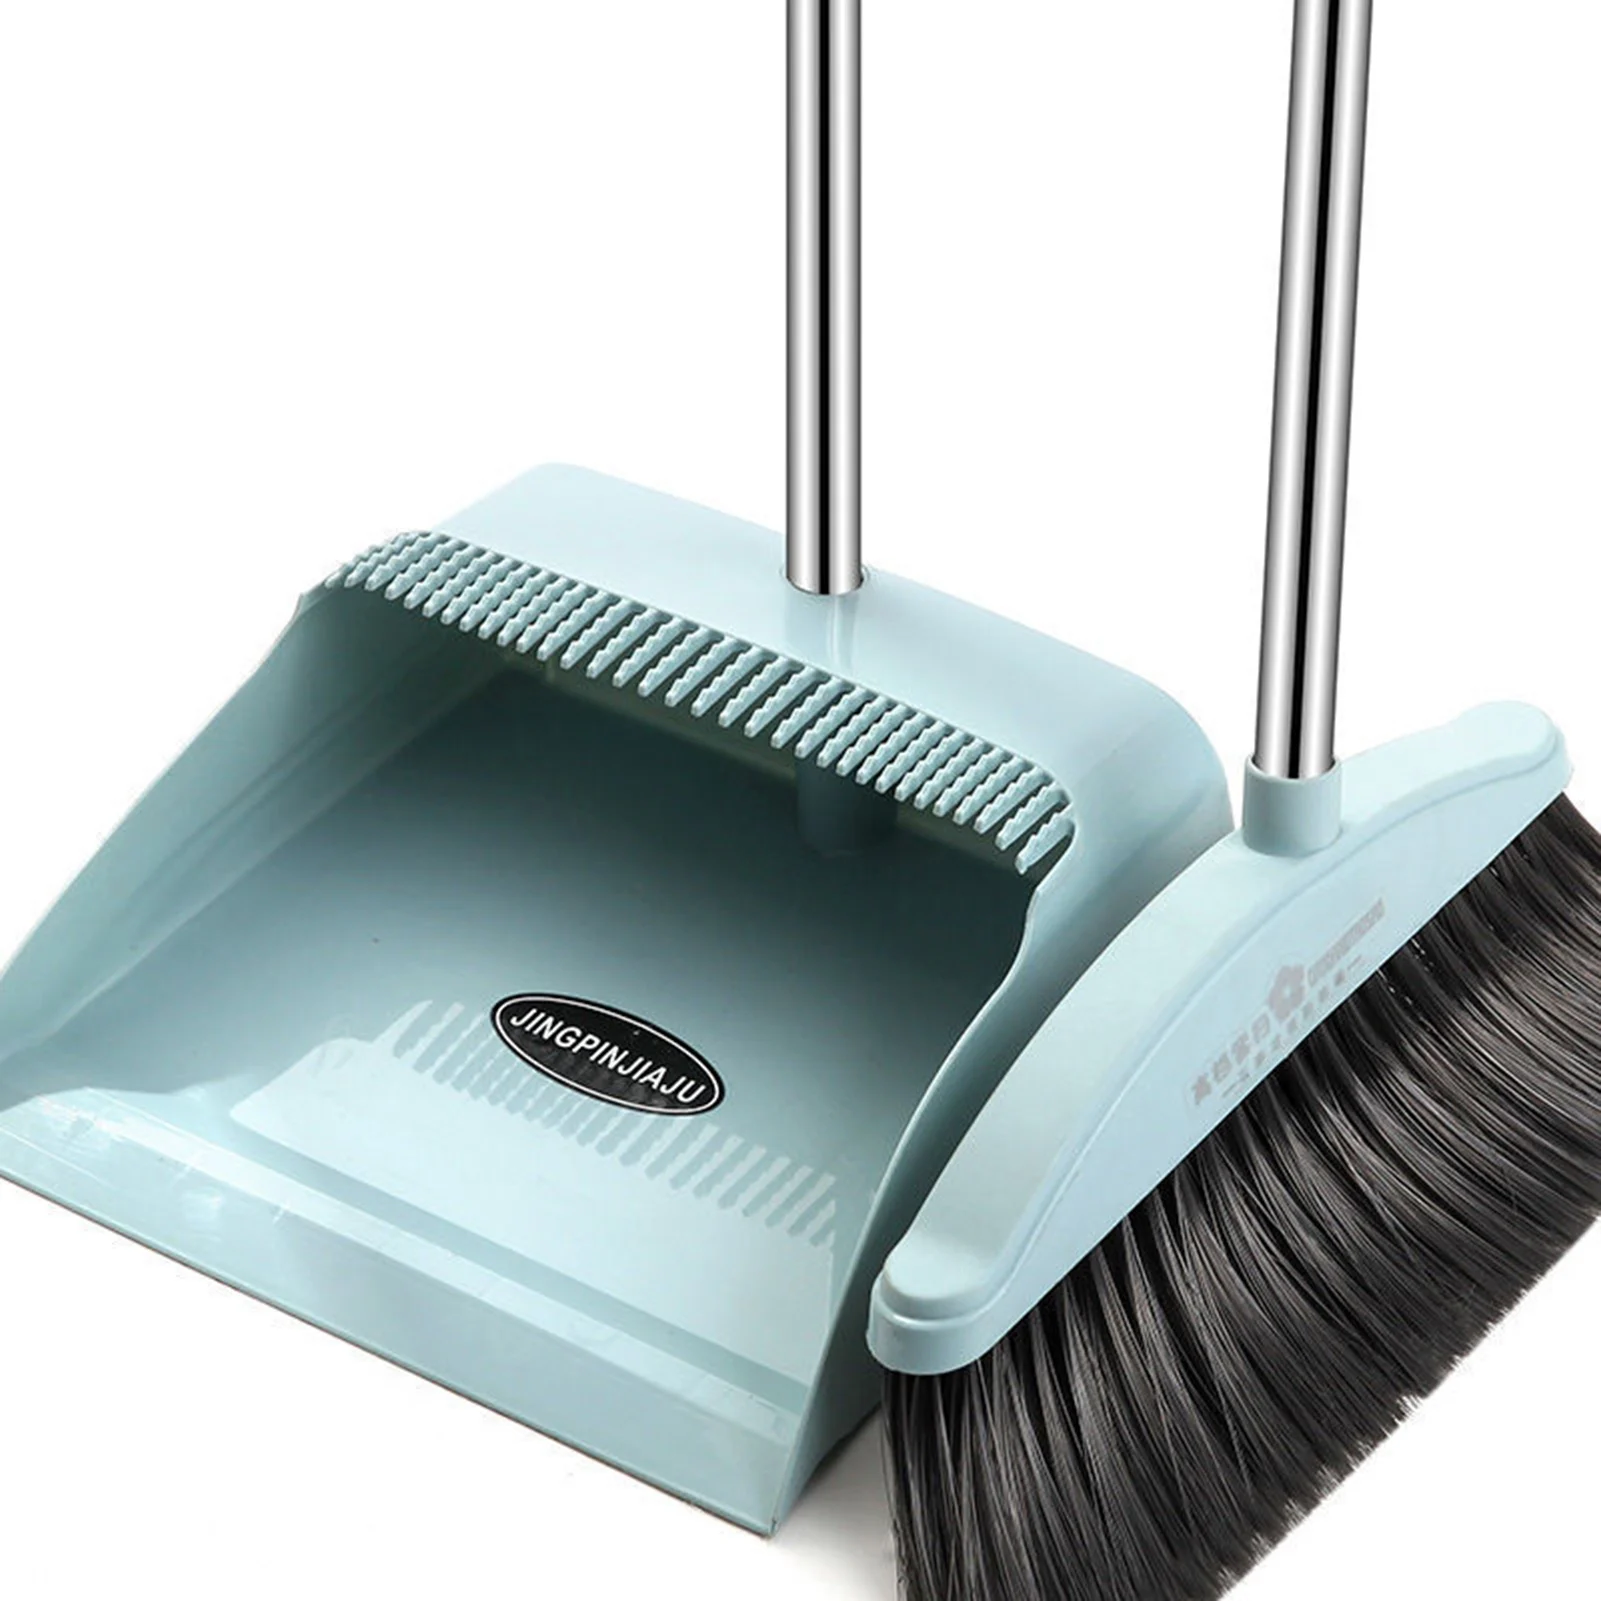 

Broom And Dustpan Set Scoop Cleaning Brush Dust Magic Sweeper Floor Toilet Home Products Shovel Dust Pan Grabber Must Have